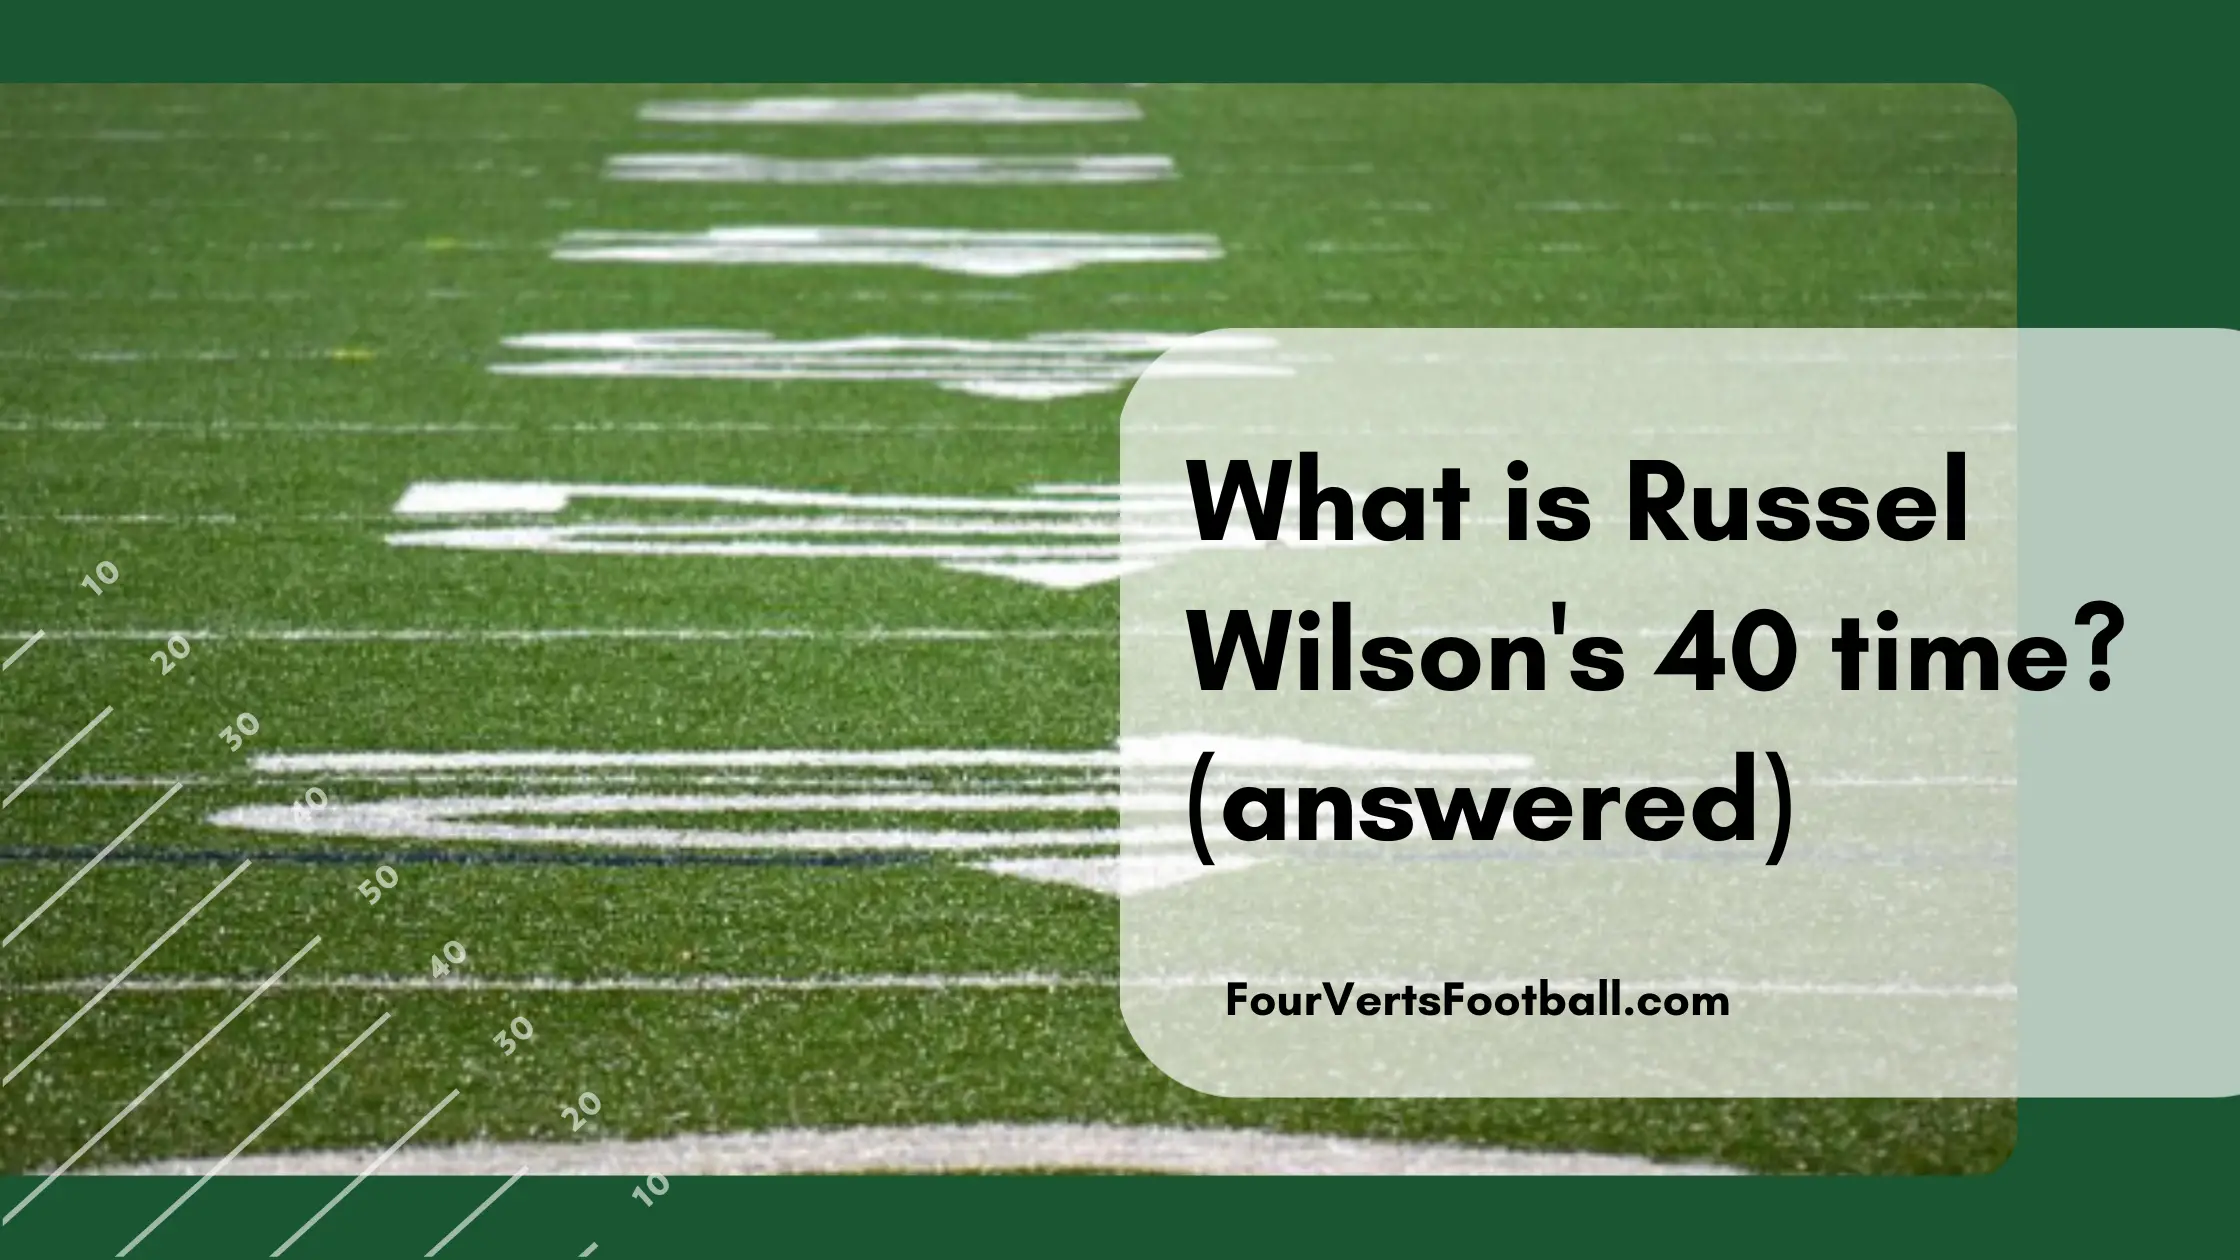 Russel wilson 40 time